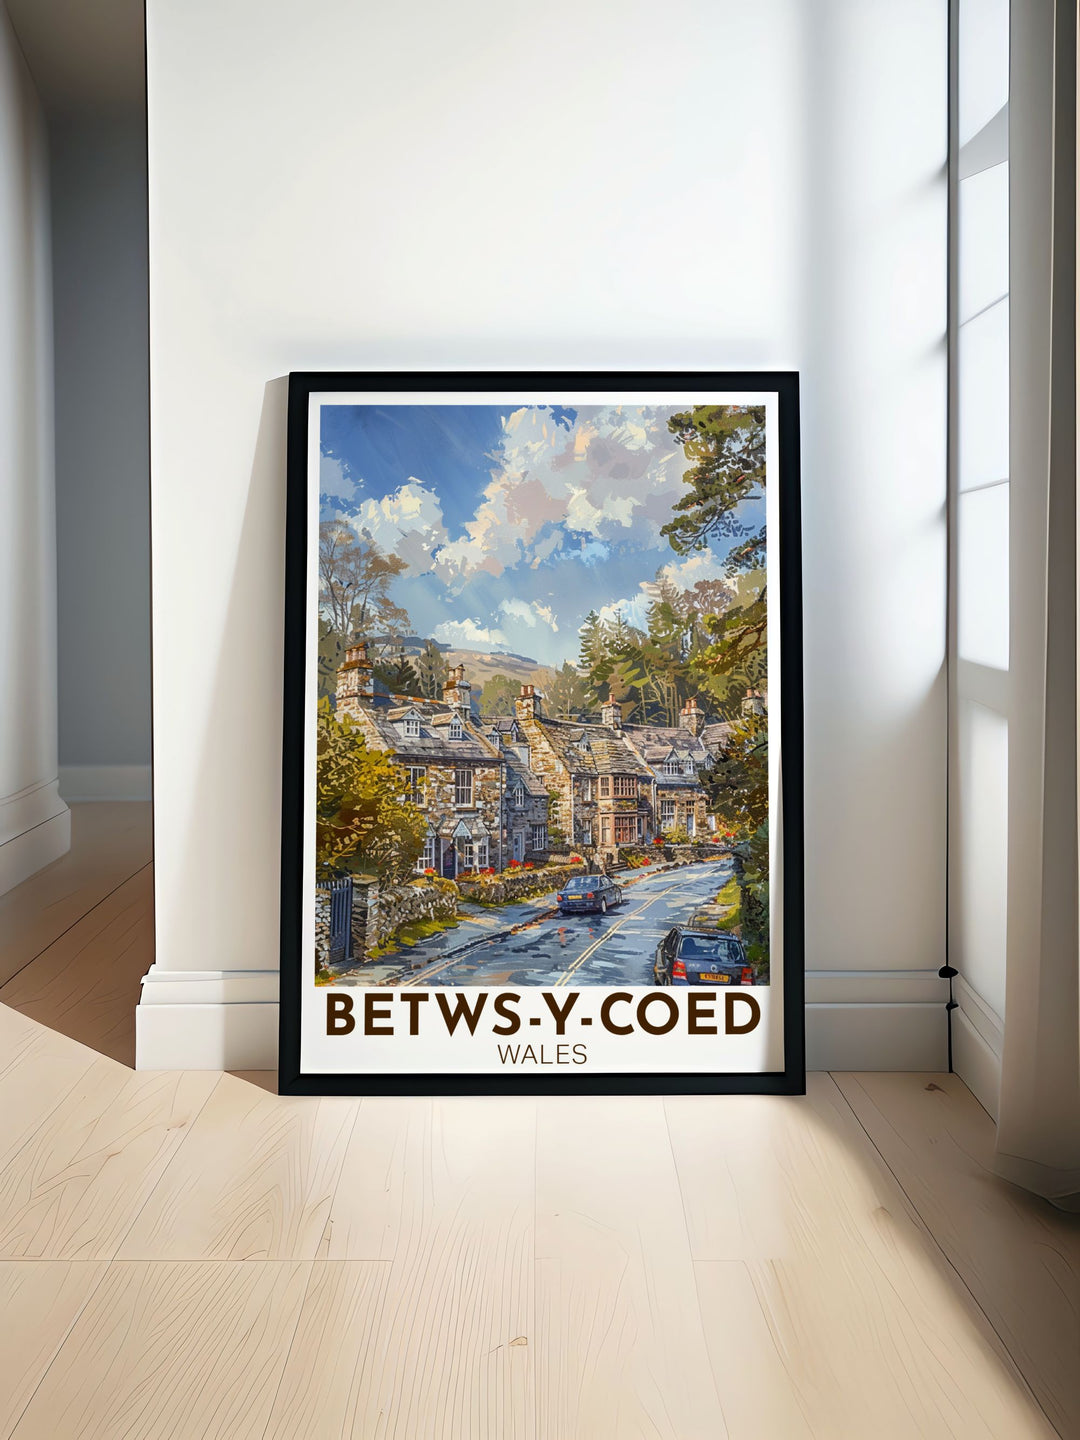 Betws y Coed travel poster featuring the charming village nestled in the lush Welsh countryside perfect for adding a touch of nature and history to your home decor or as a thoughtful gift for lovers of Betws y Coed and Wales.